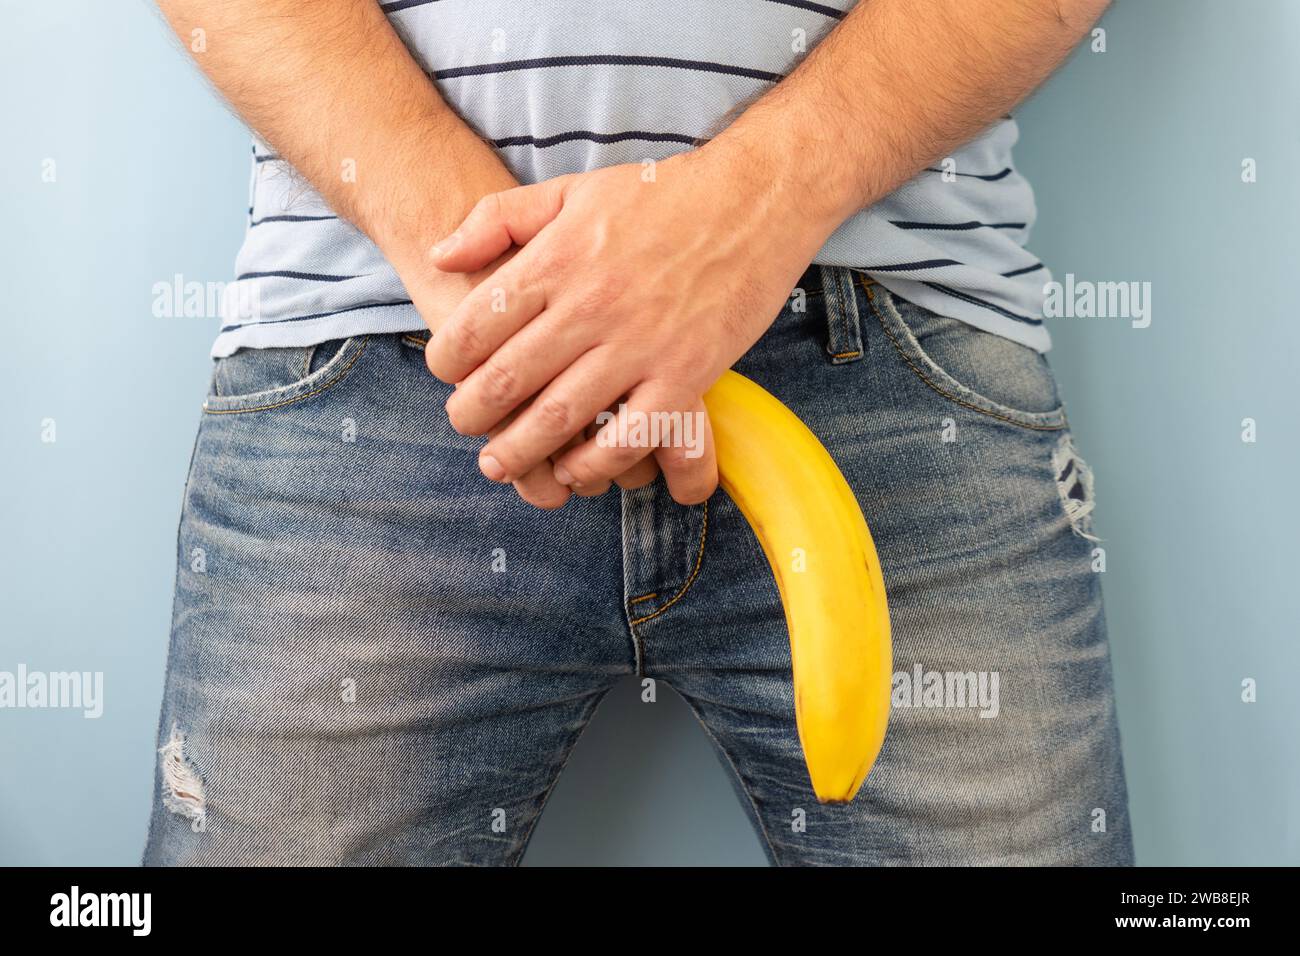 banana out of mens jeans like men penis. potency concept Stock Photo